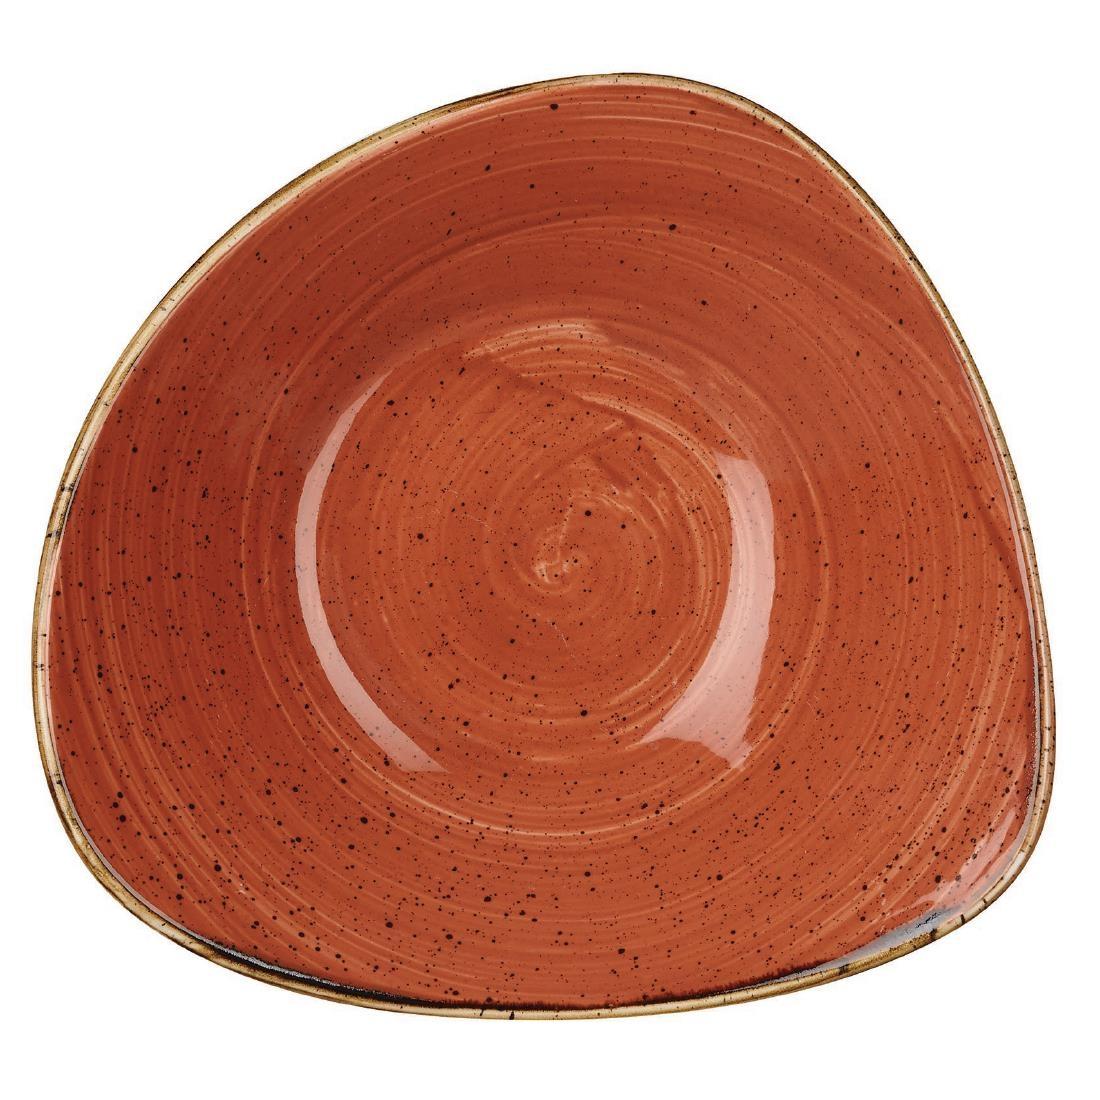 Churchill Stonecast Triangle Bowl Spiced Orange 265mm (Pack of 12) - DK542  - 1